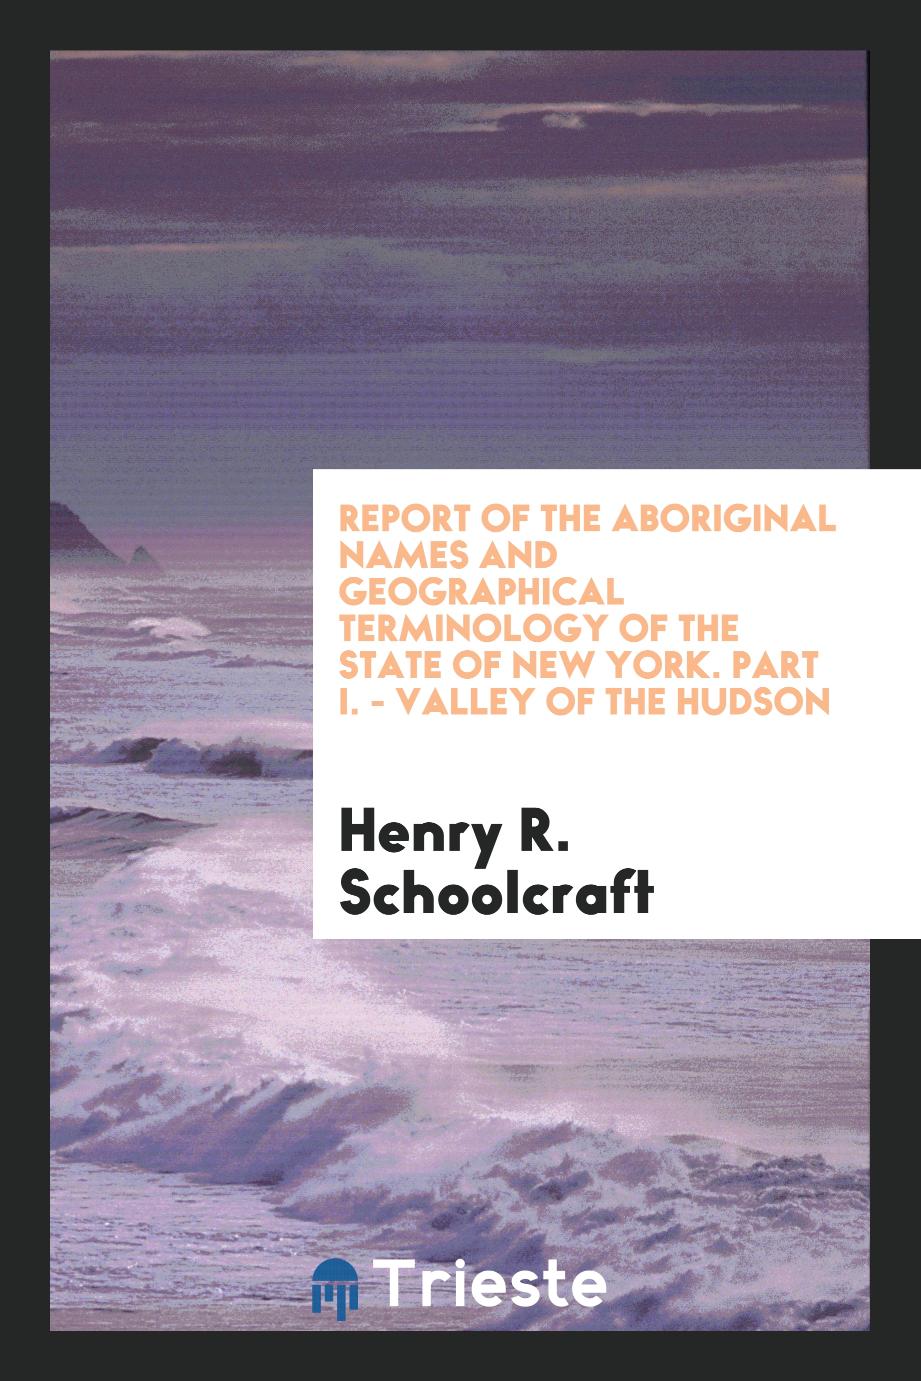 Report of the aboriginal names and geographical terminology of the state of New York. Part I. - Valley of the Hudson